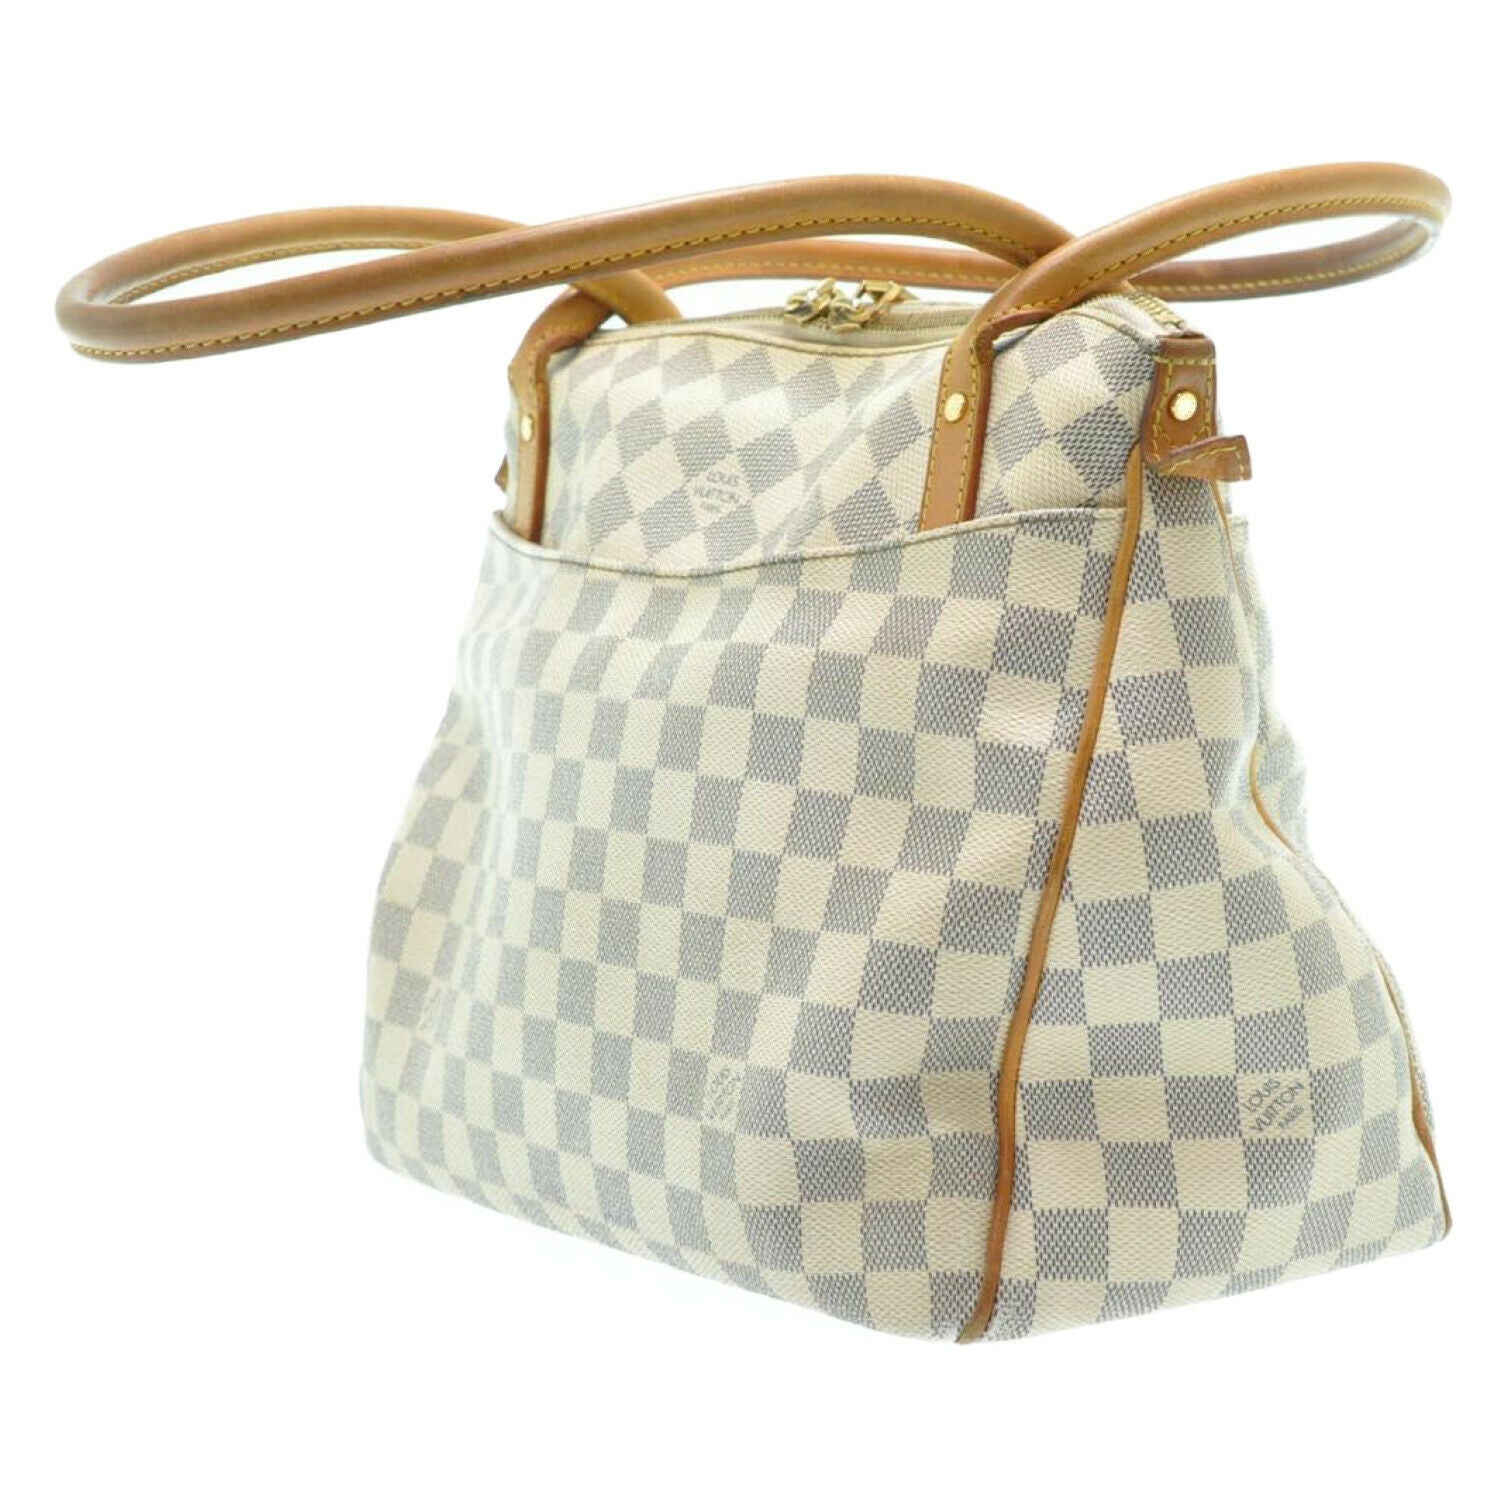 LV GALLERIA PM!!! Damier Ebene OR Damier Azur!! You pick which one